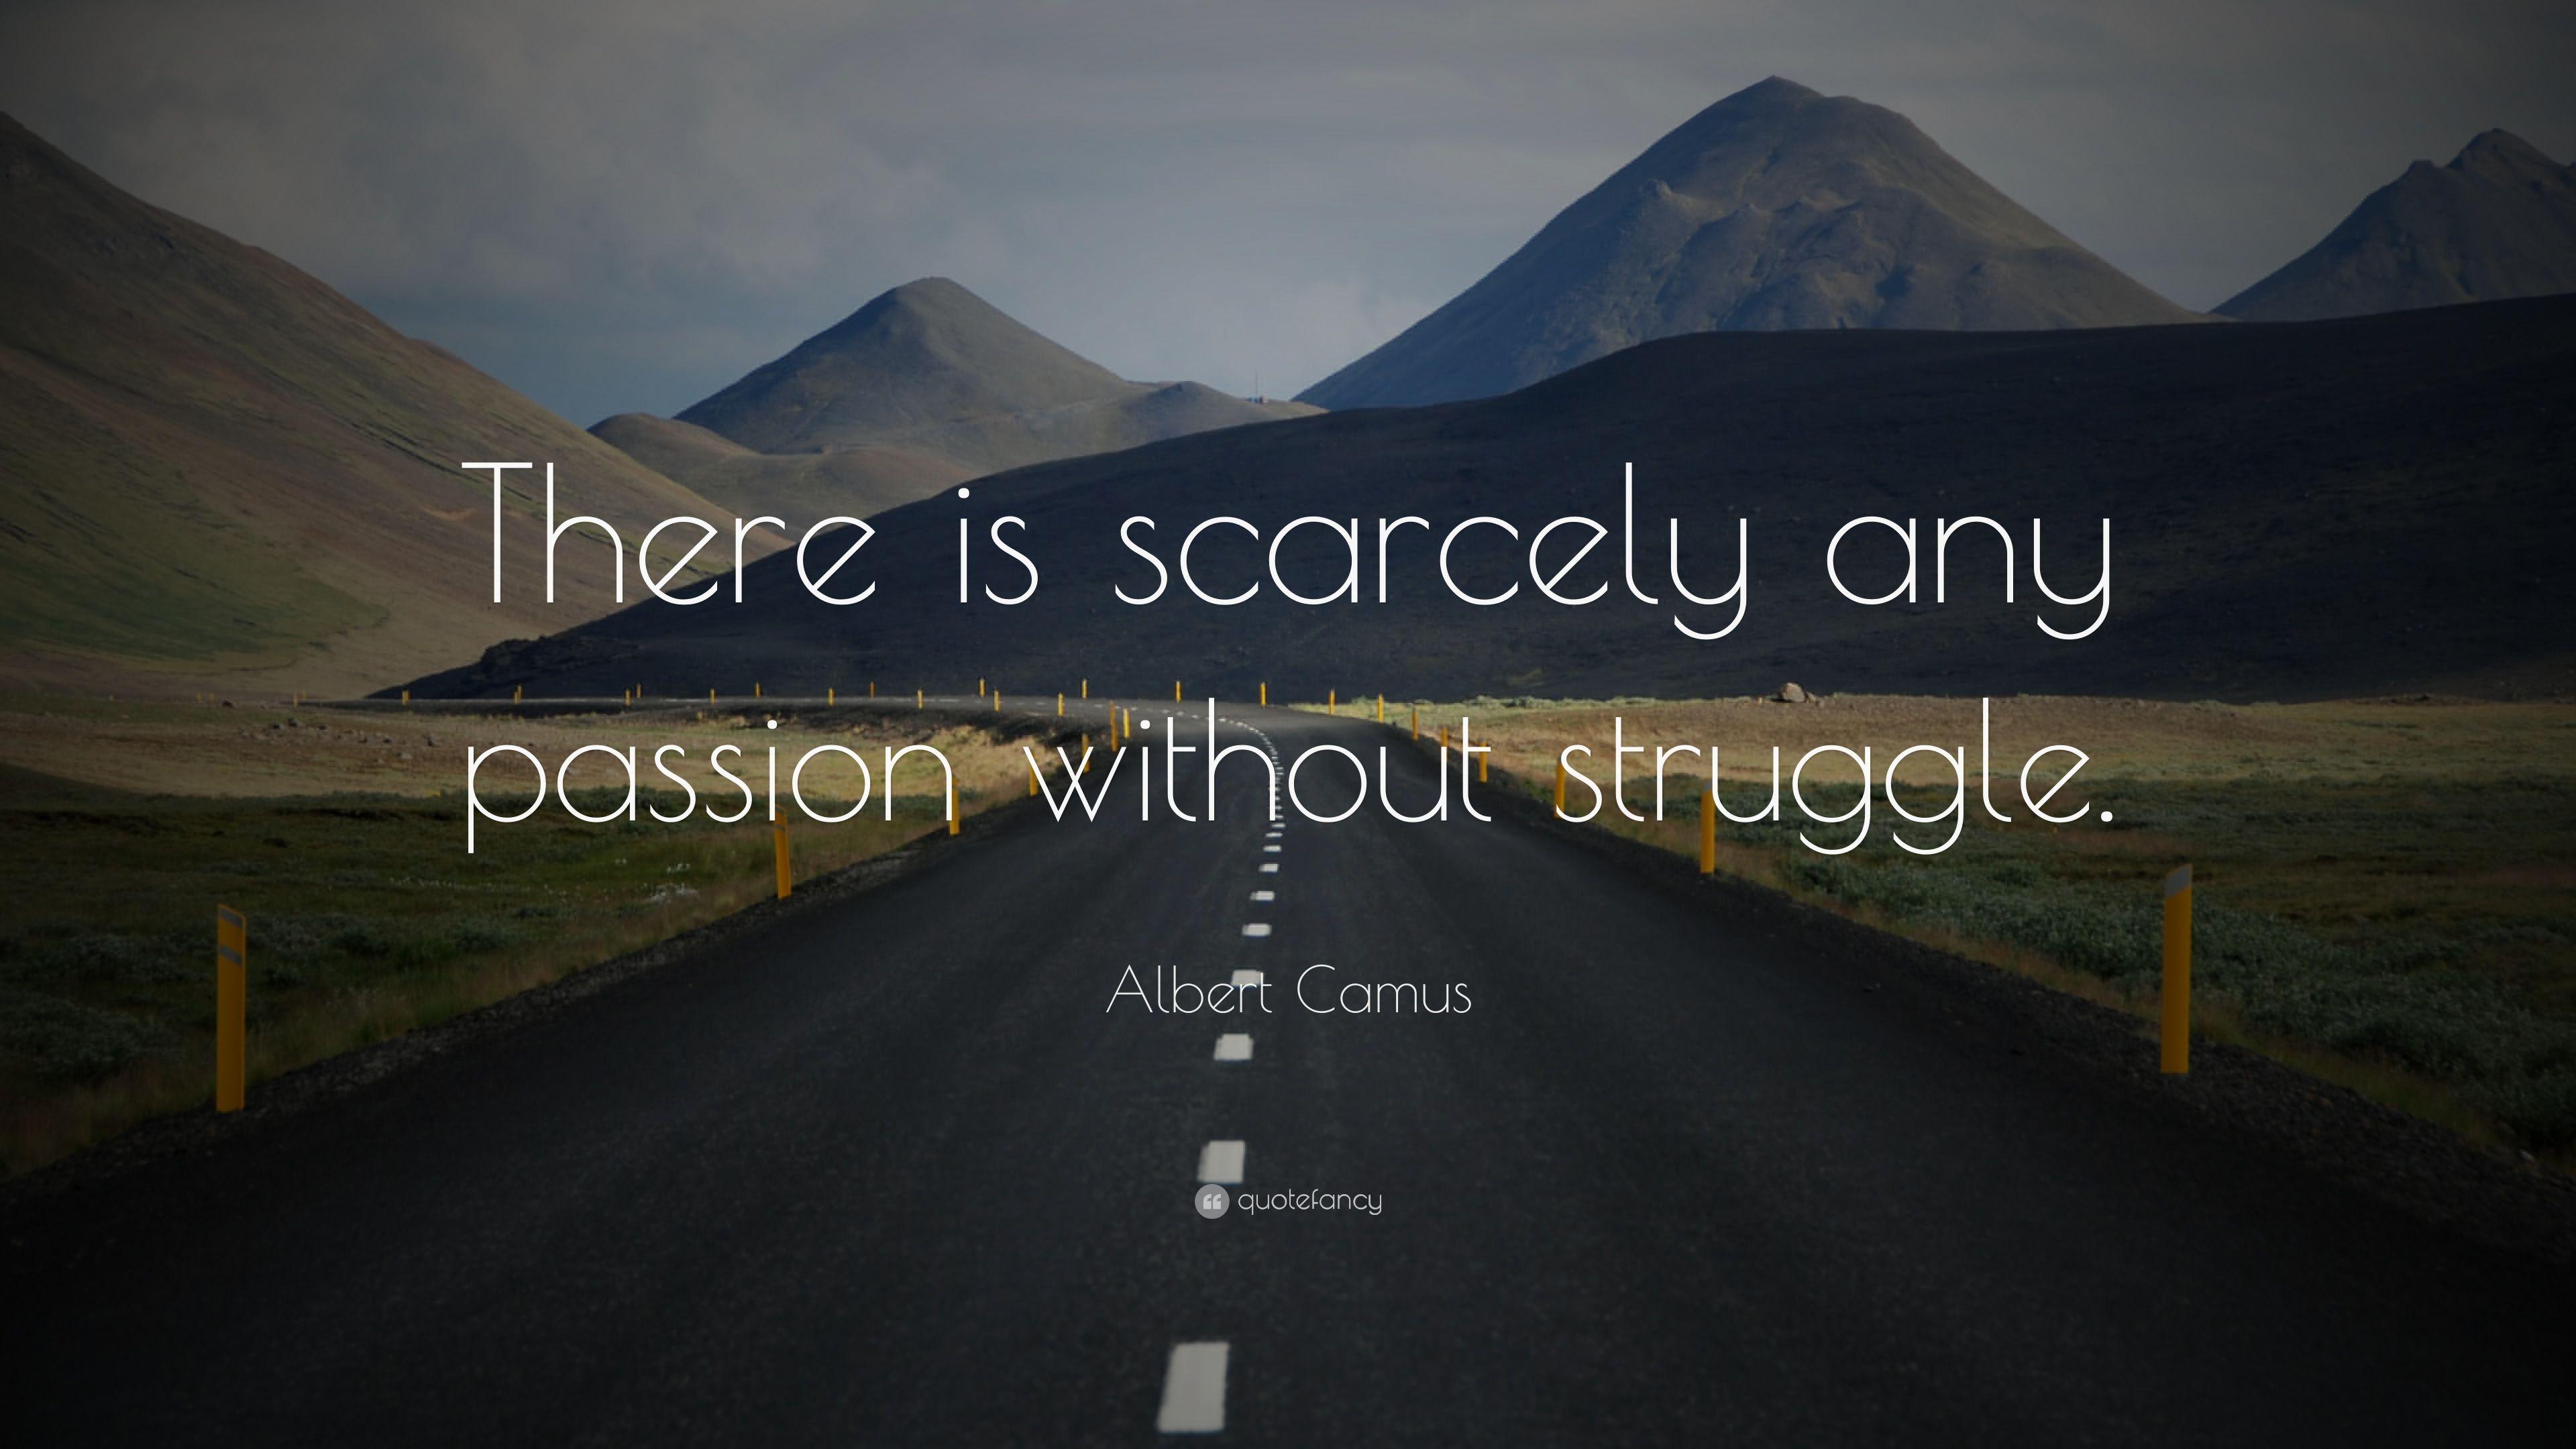 Albert Camus Quote: “There is scarcely any passion without